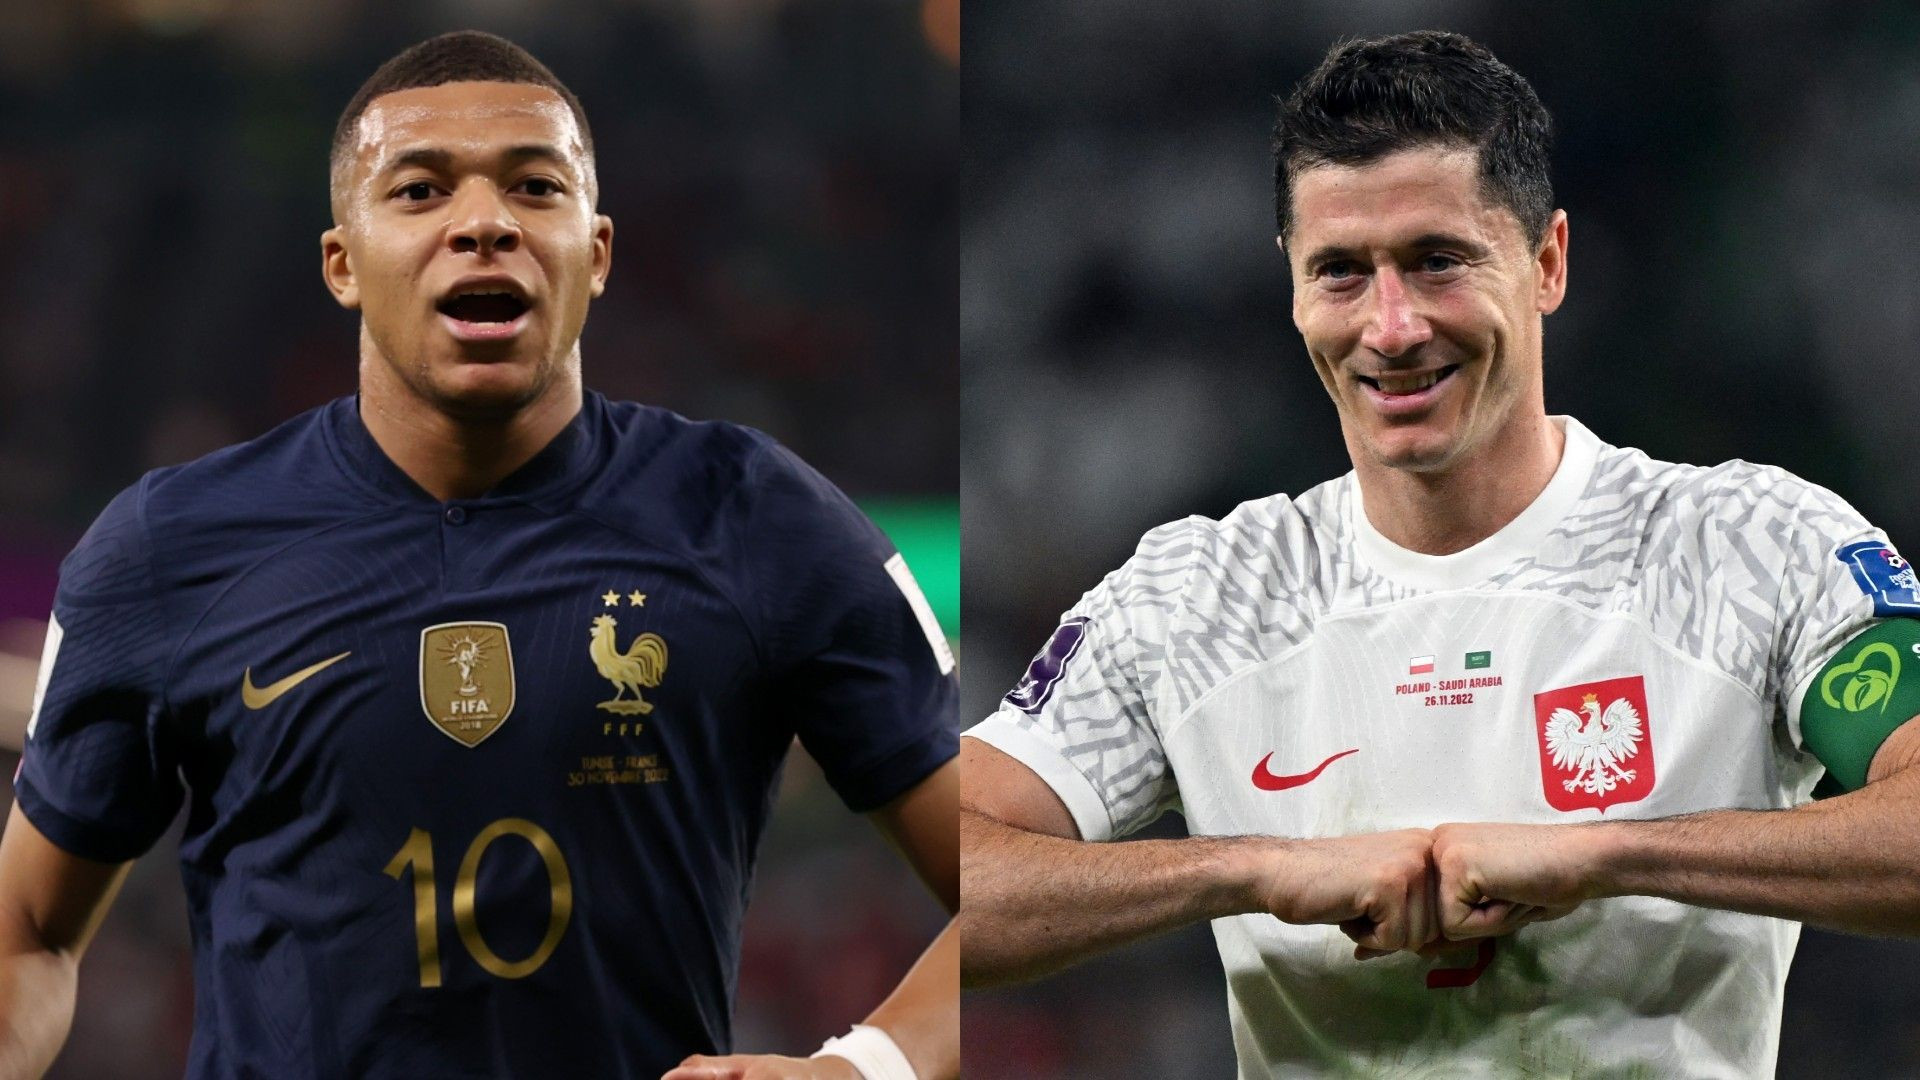 France vs Poland: Live stream, TV channel, kick-off time & where to watch | Goal.com UK